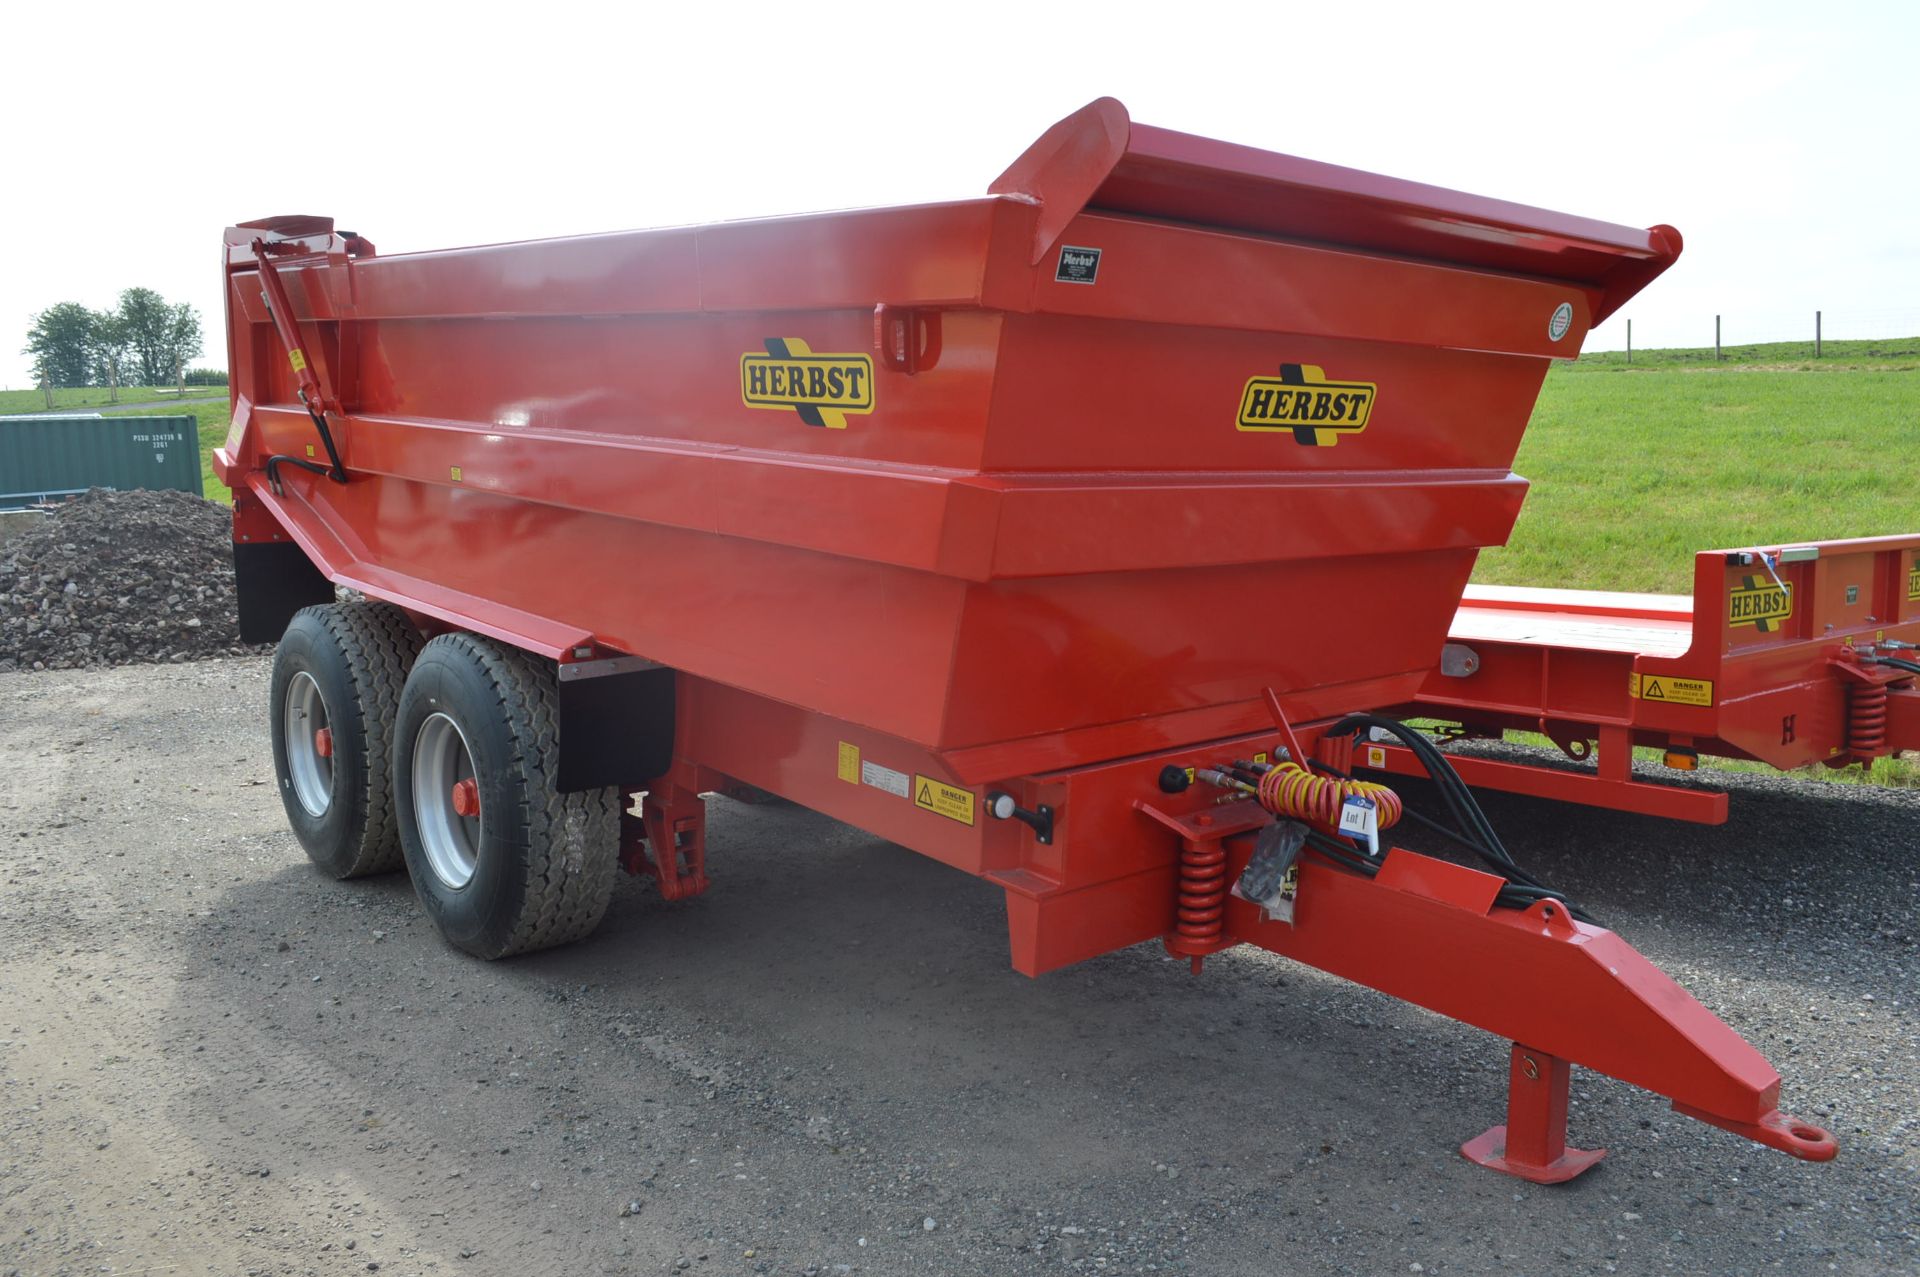 Herbst TWIN AXLE TIPPING 20t DUMP TRAILER (unused), serial no. 5335340162283A, year of manufacture